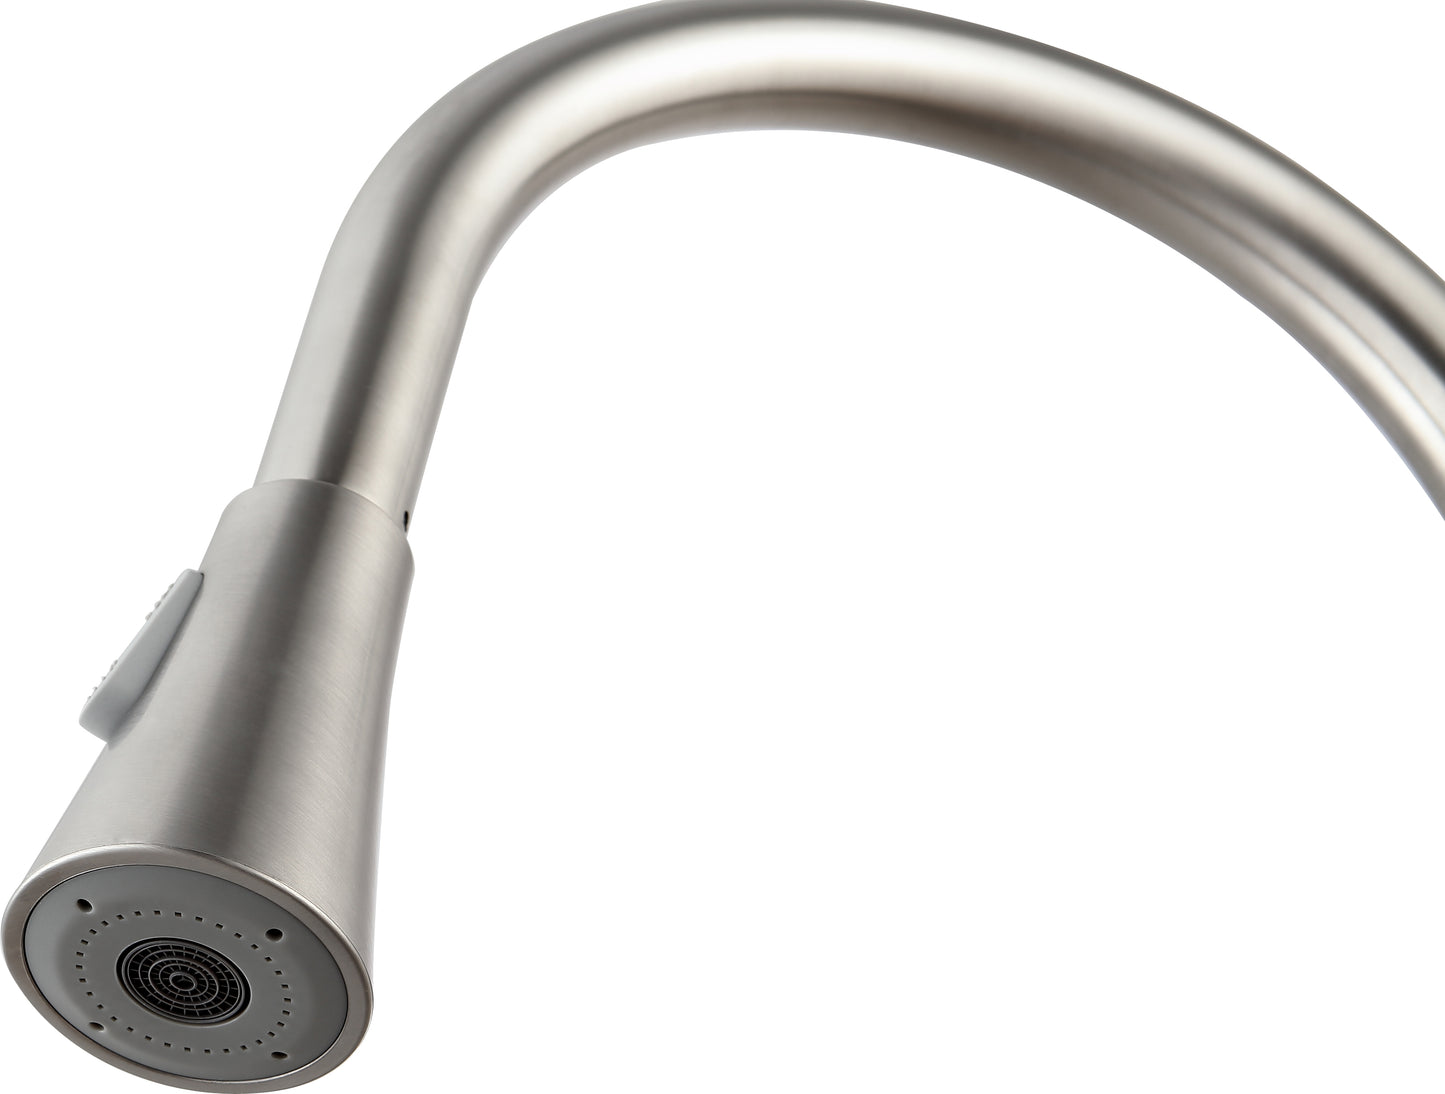 Tulip Single-Handle Pull-Out Sprayer Kitchen Faucet